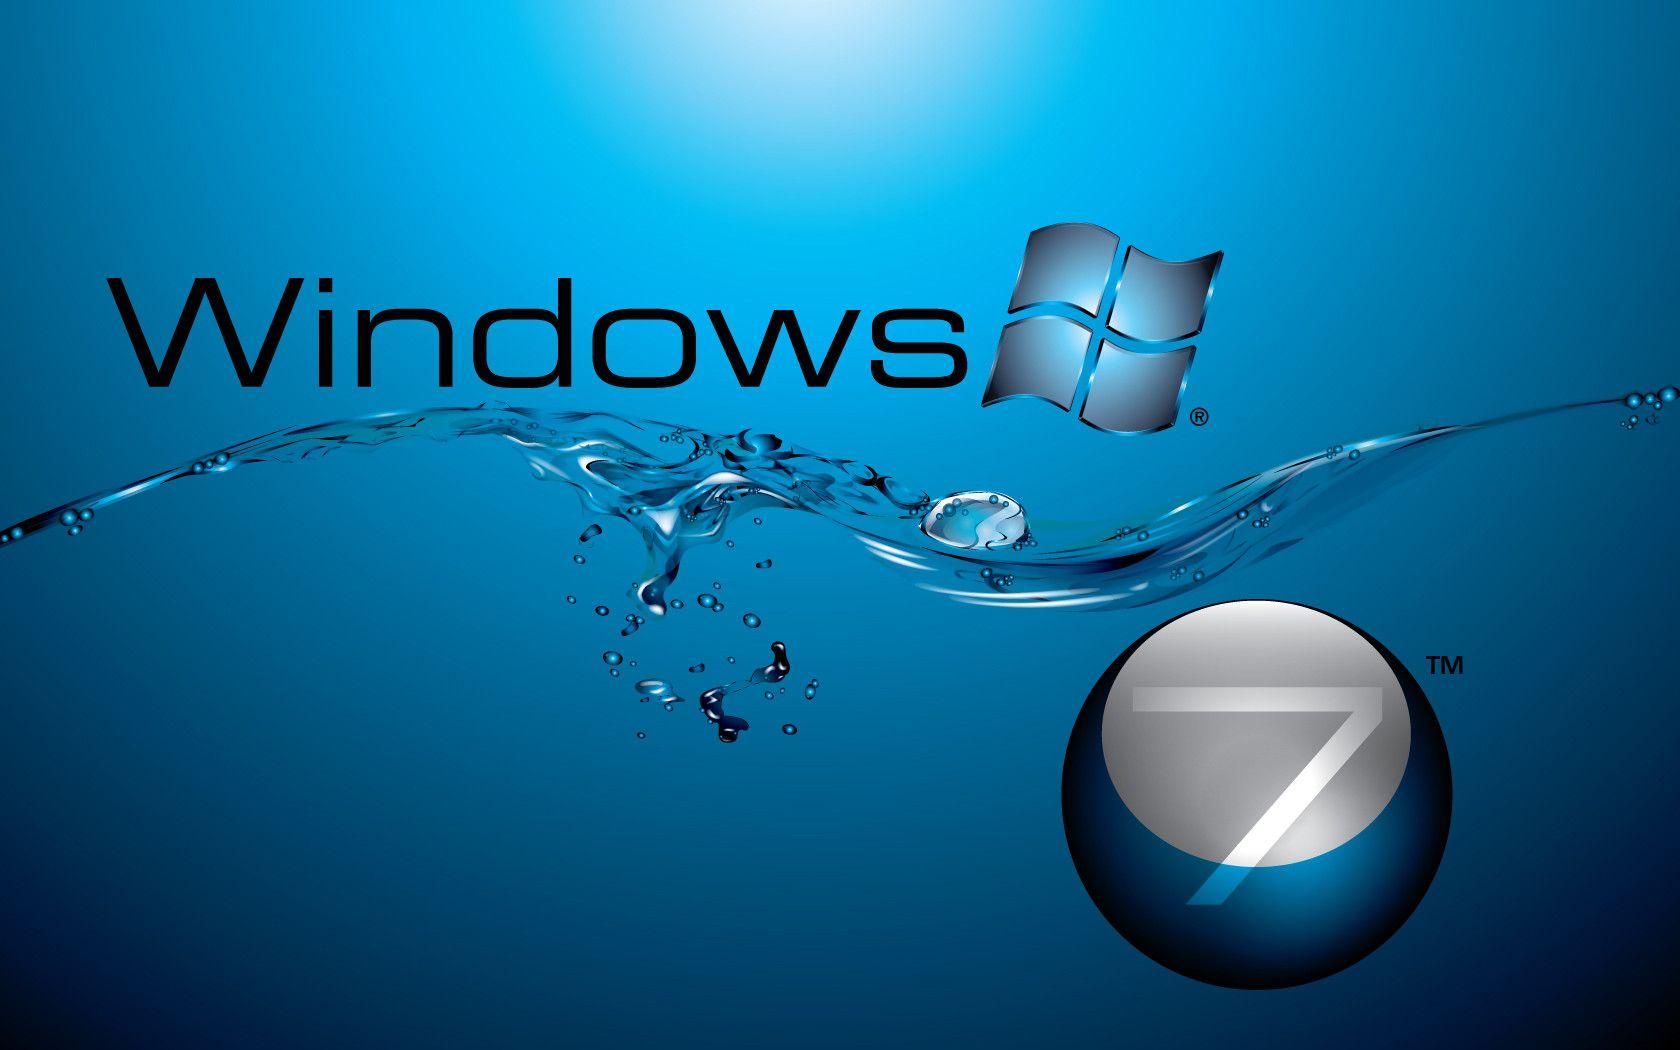 Free HD Wallpapers For Windows 7 - Wallpaper Cave